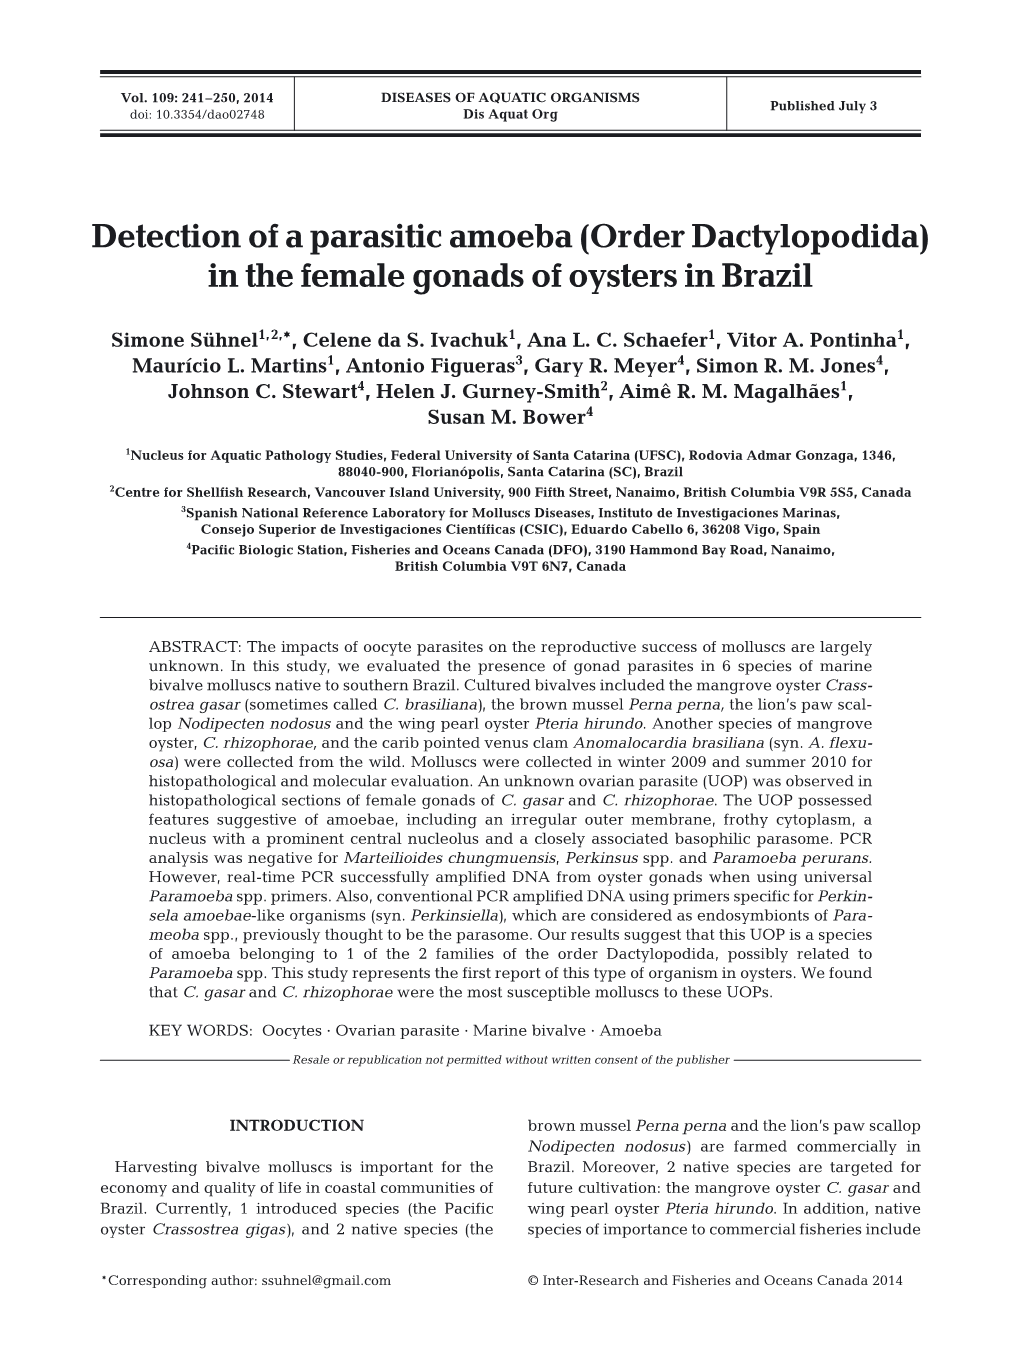 Detection of a Parasitic Amoeba (Order Dactylopodida) in the Female Gonads of Oysters in Brazil